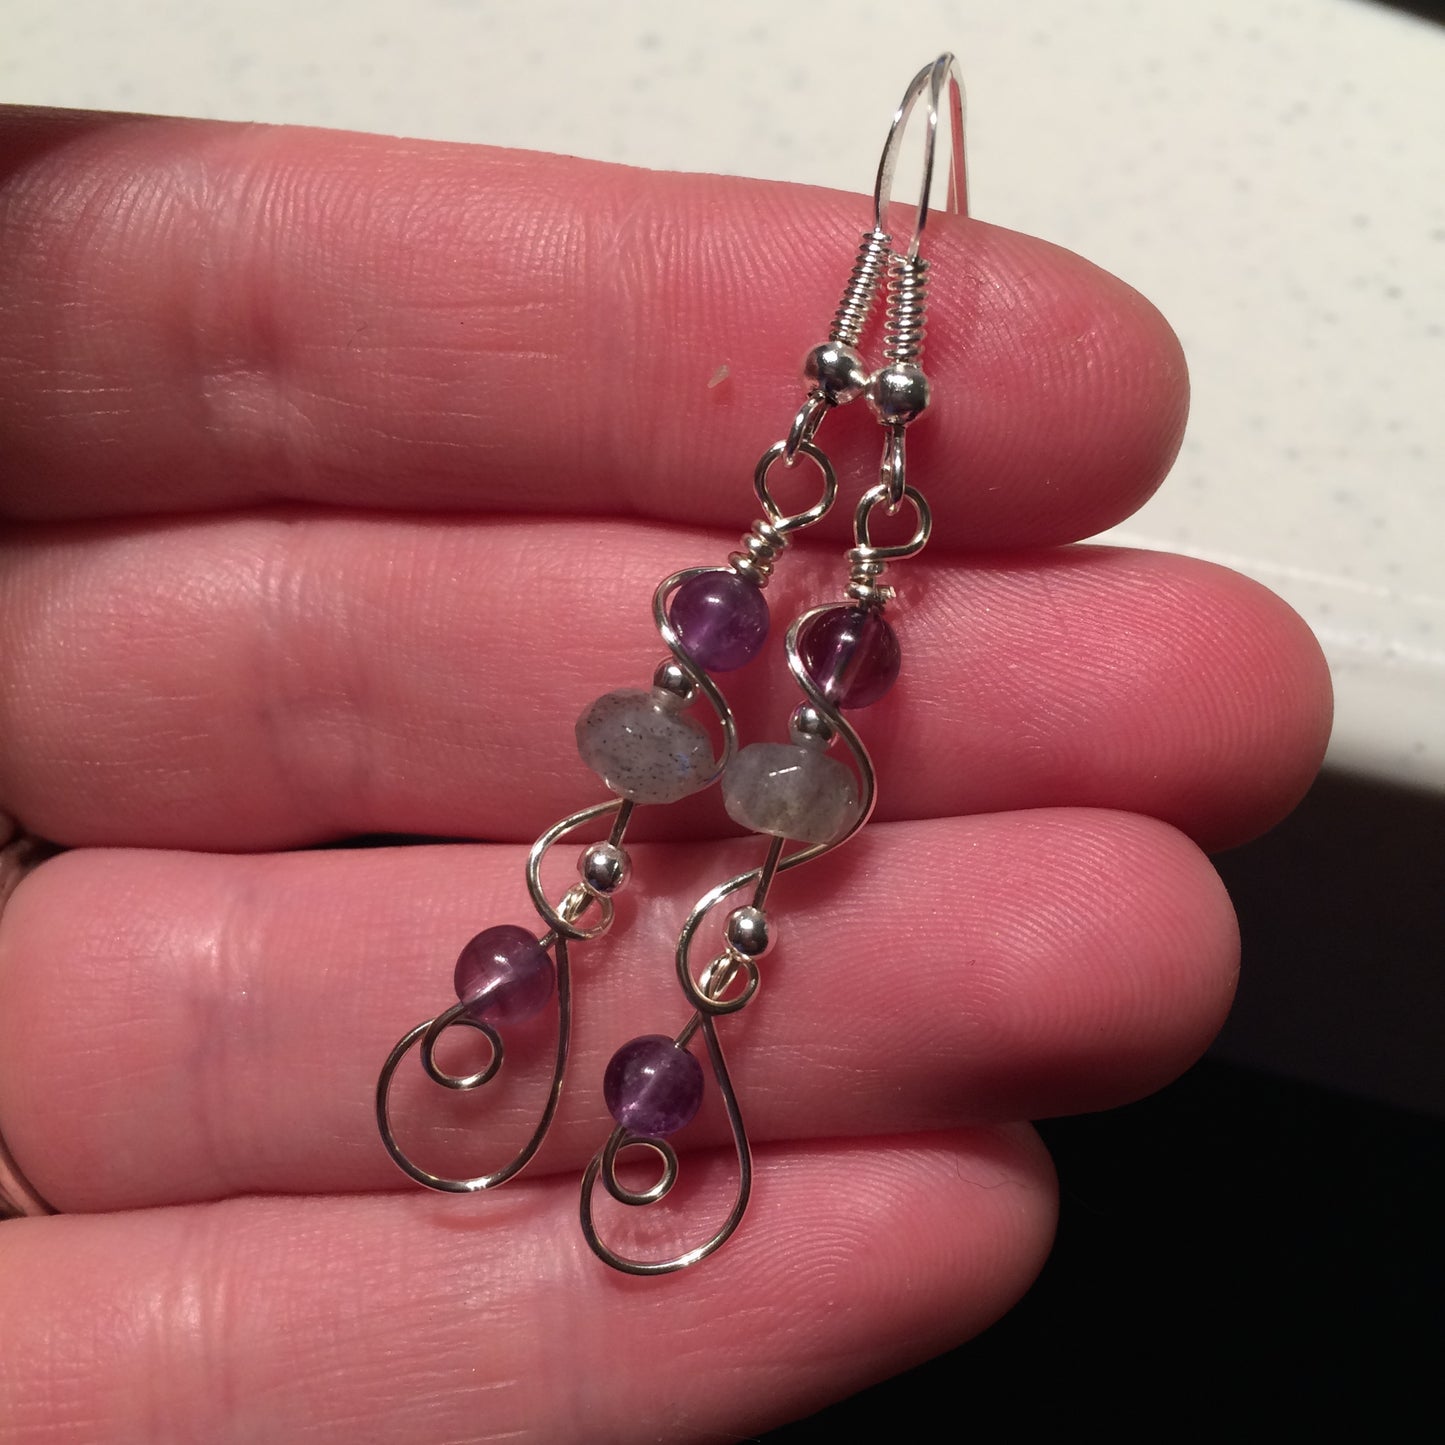 Amethyst and Labradorite earrings for IG